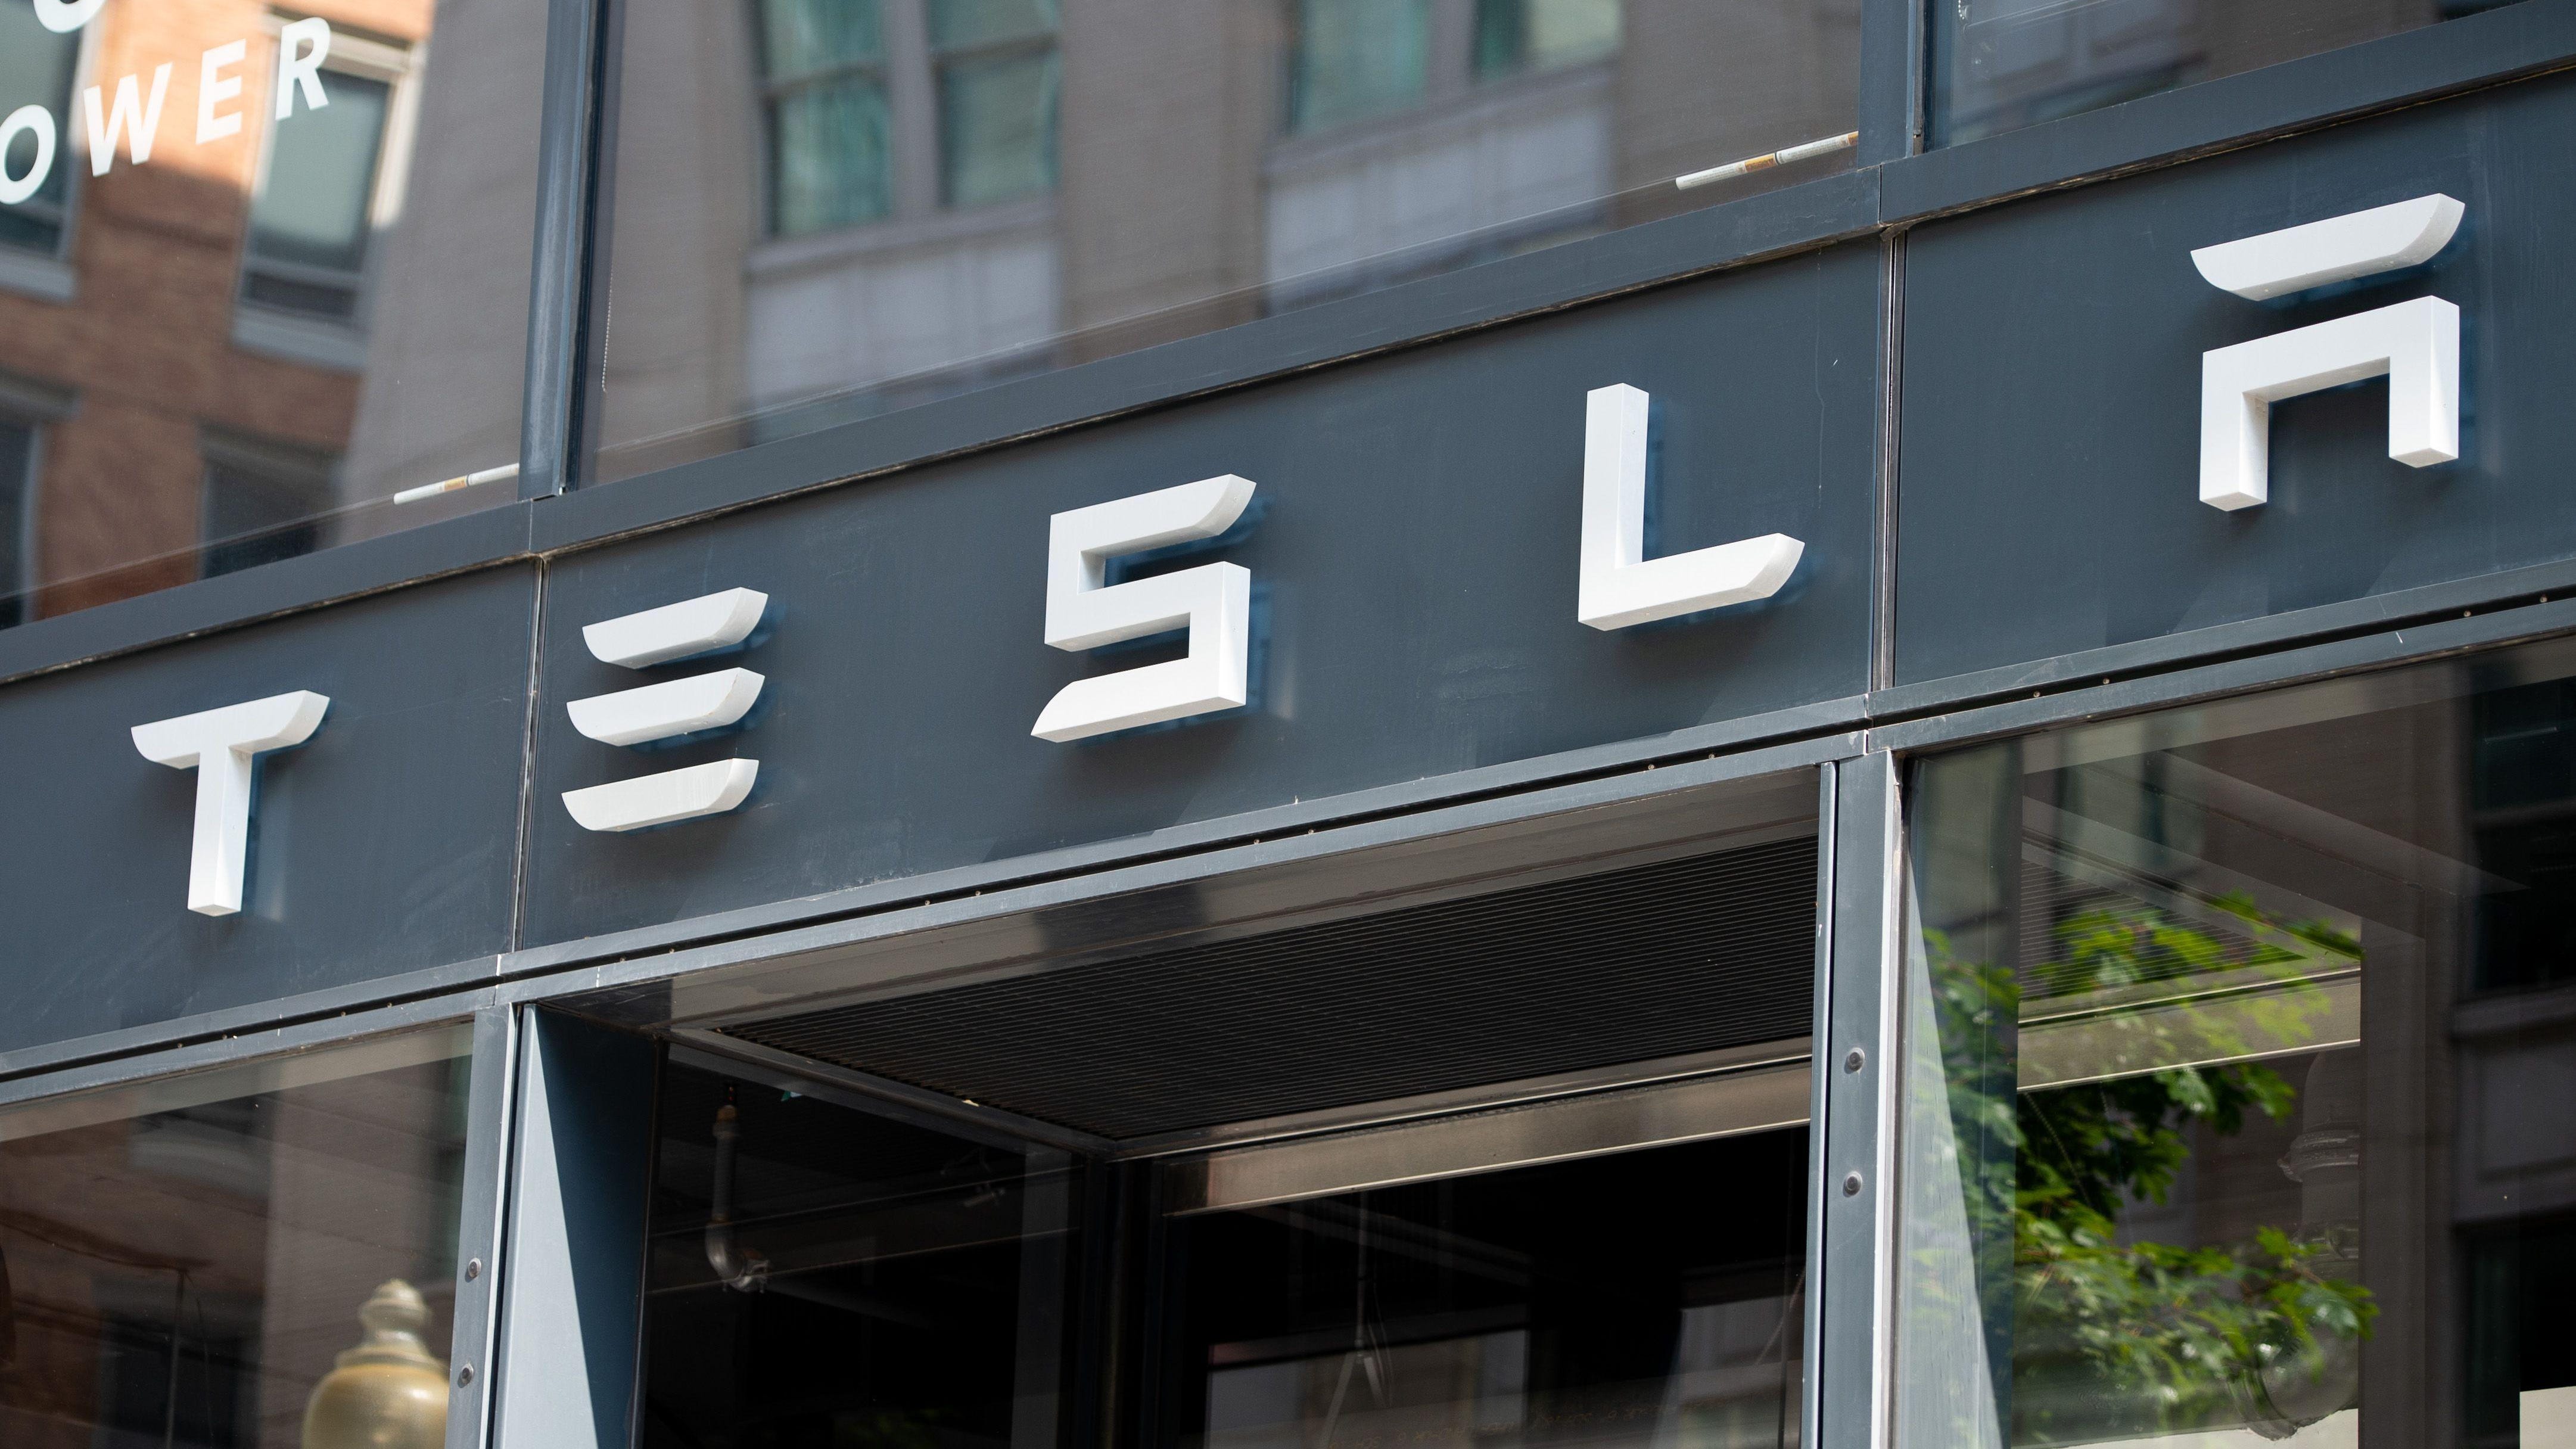 The Tesla logo is seen outside of their showroom in Washington, D.C. Tesla Inc. said it plans to raise average vehicle prices by about 3 percent globally after it reversed a decision to shut down most of its stores.